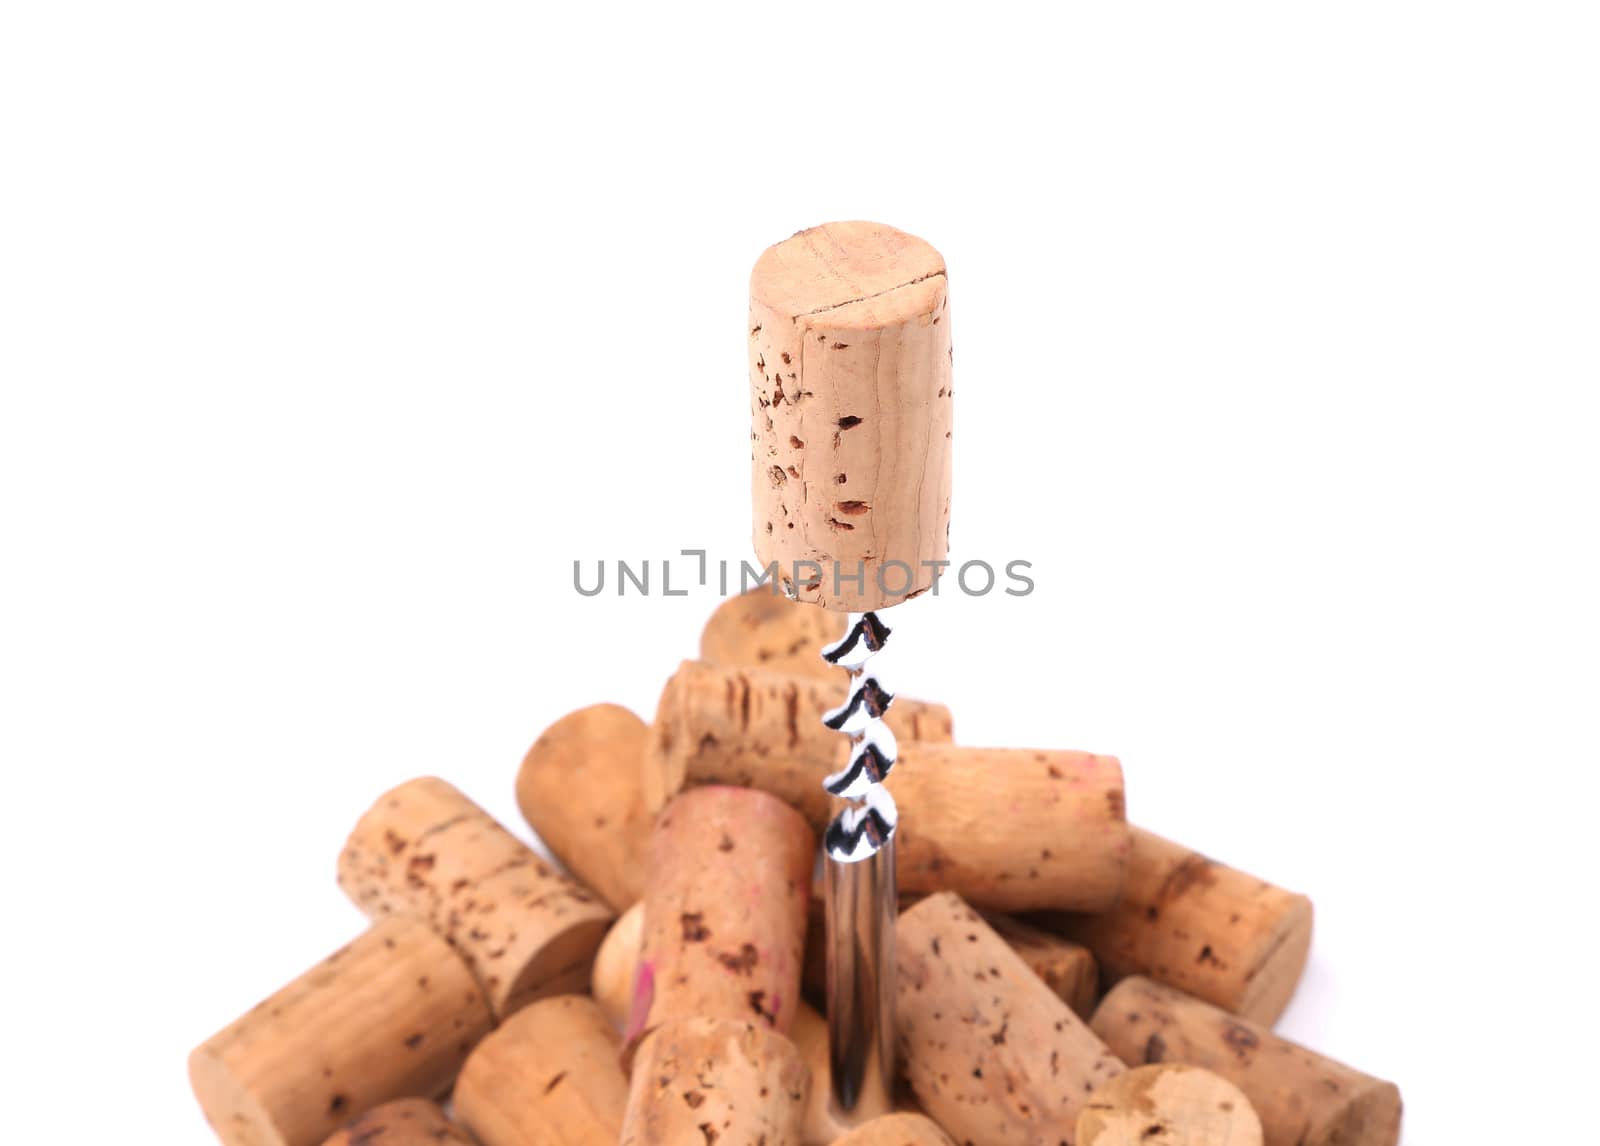 Corkscrew and wine corks by indigolotos